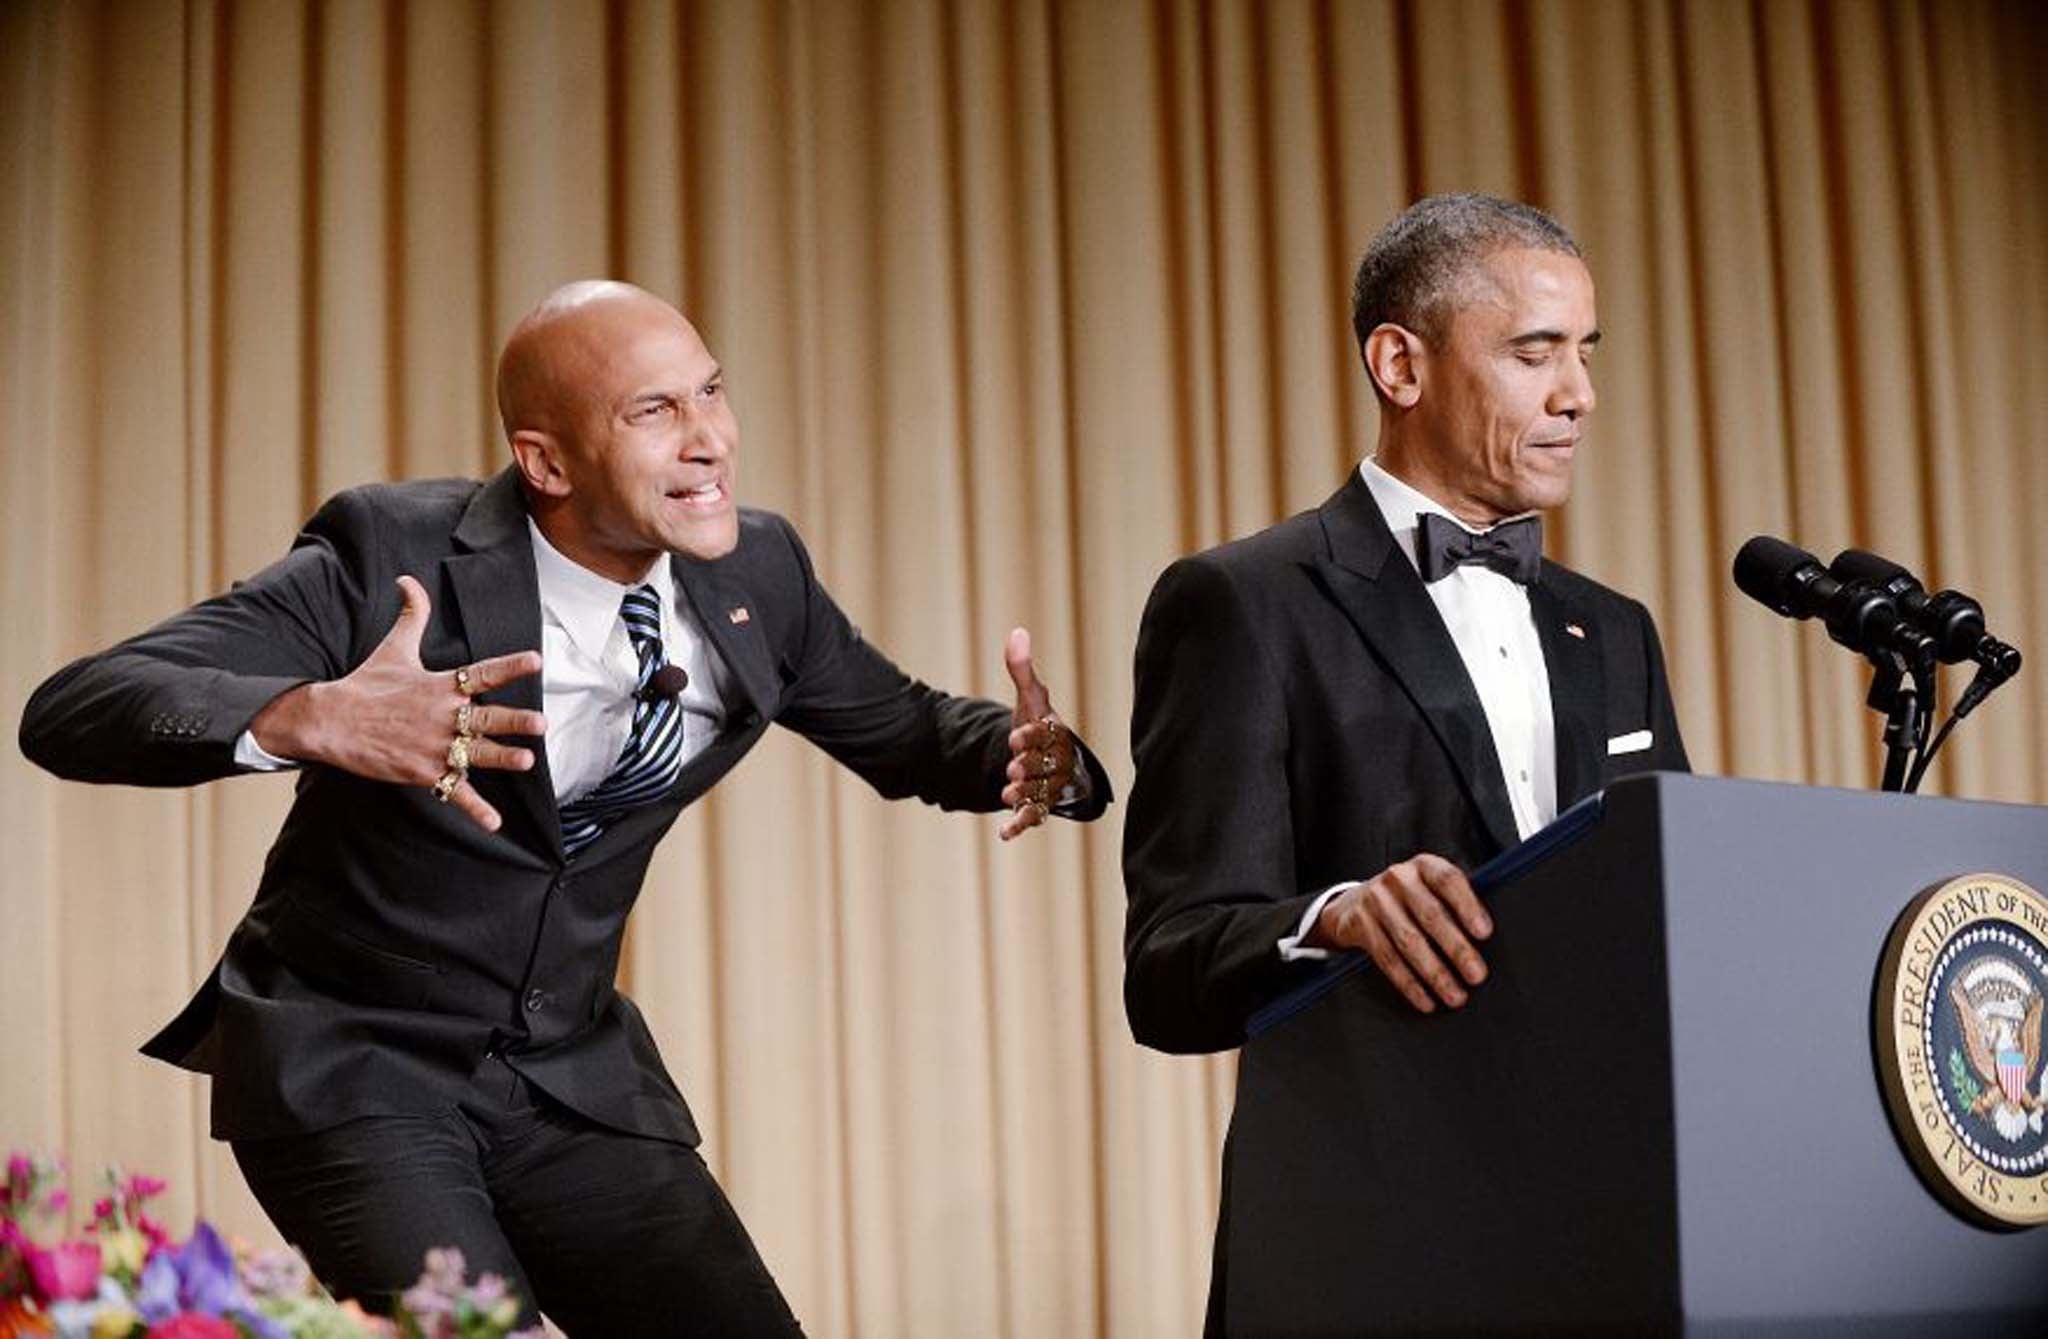 Keegan-Michael Key from Key &amp; Peele and Barack Obama perform at the annual White House Correspondent's Association Gala